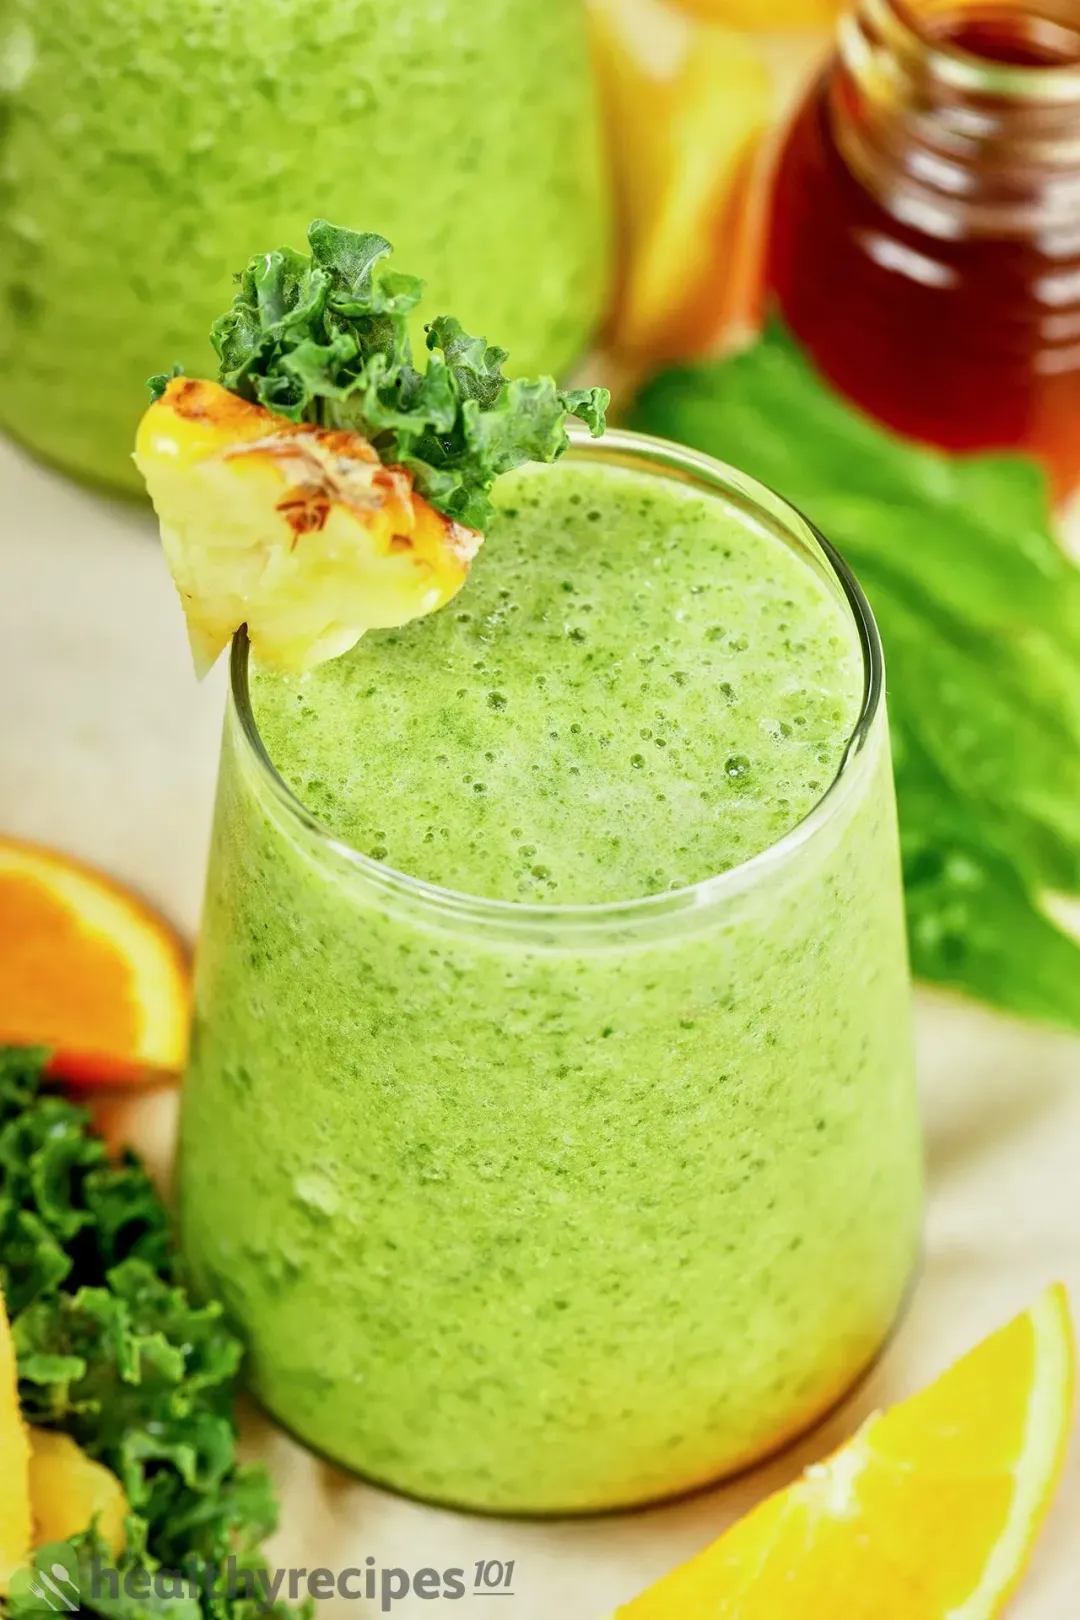 a glass of pineapple green smoothie with a pineapple wedge and kale leaves placed on its rim